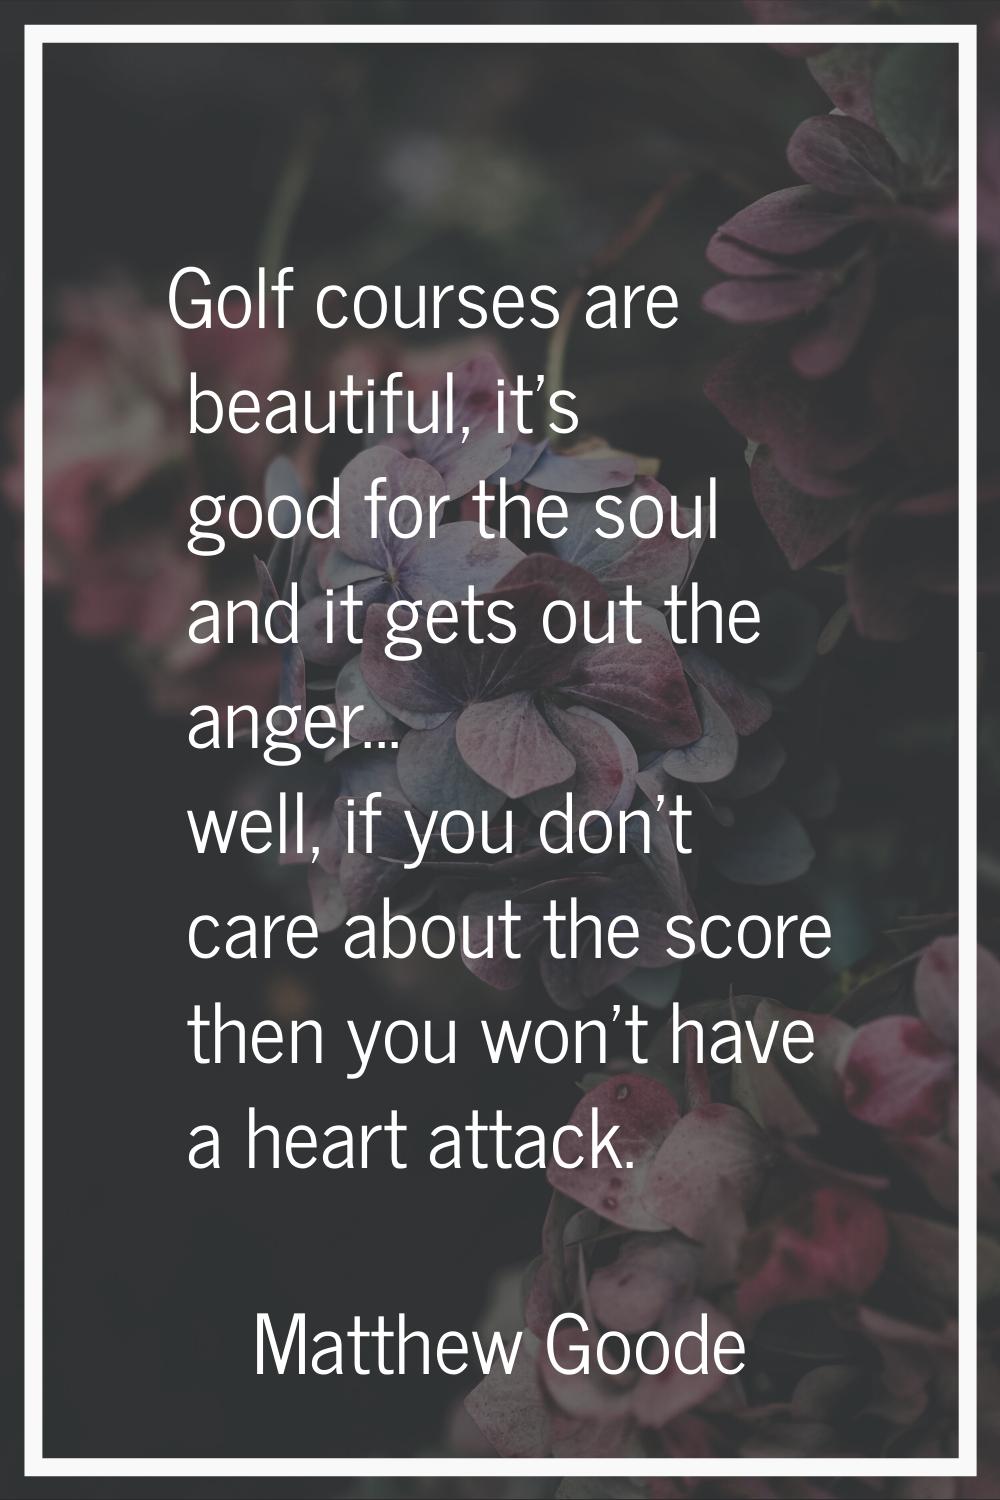 Golf courses are beautiful, it's good for the soul and it gets out the anger... well, if you don't 